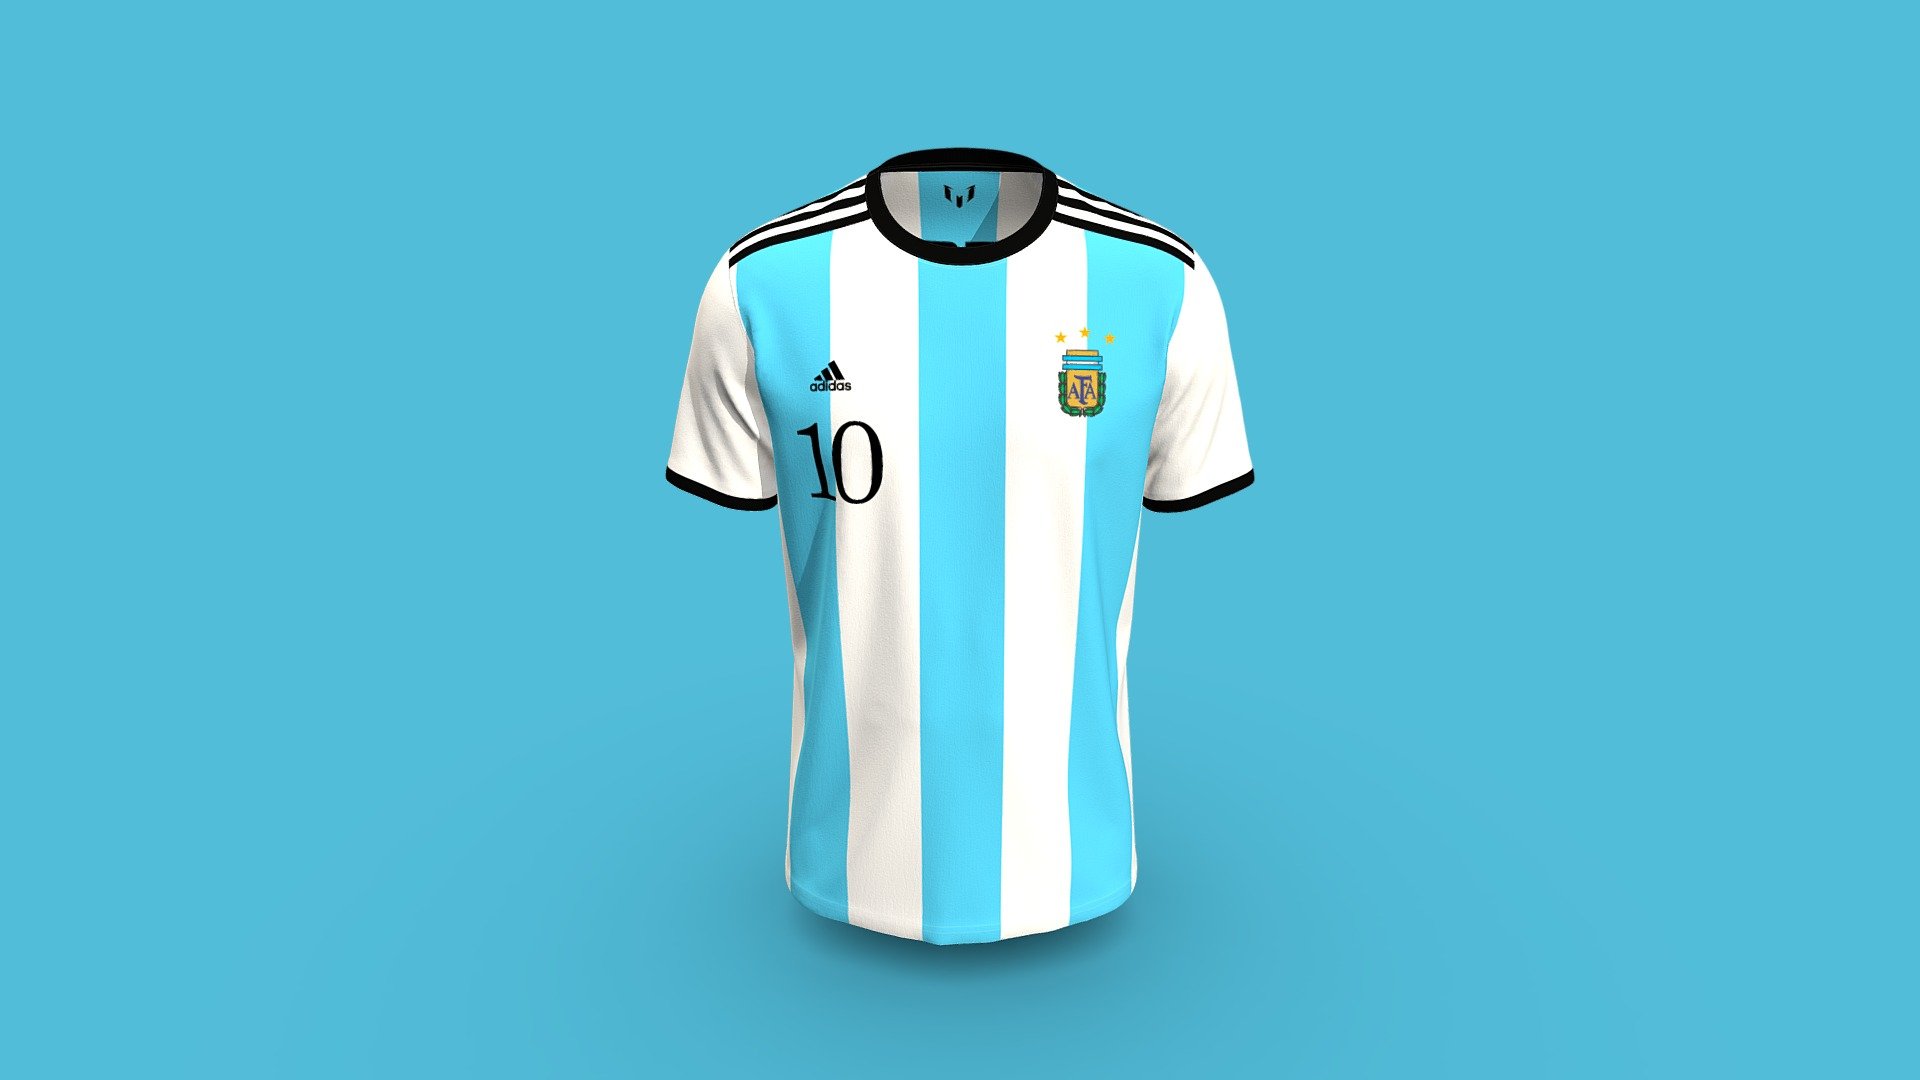 Cloth Title = New Jersey 2022 With Messi Logo Design

SKU = DG100044 

Category = Unisex 

Product Type = T-Shirt 

Cloth Length = Regular 

Body Fit = Loose Fit 

Occasion = Casual  

Sleeve Style = Set In Sleeve


Our Services:

3D Apparel Design.

OBJ,FBX,GLTF Making with High/Low Poly.

Fabric Digitalization.

Mockup making.

3D Teck Pack.

Pattern Making.

2D Illustration.

Cloth Animation and 360 Spin Video.


Contact us:- 

Email: info@digitalfashionwear.com 

Website: https://digitalfashionwear.com 


We designed all the types of cloth specially focused on product visualization, e-commerce, fitting, and production. 

We will design: 

T-shirts 

Polo shirts 

Hoodies 

Sweatshirt 

Jackets 

Shirts 

TankTops 

Trousers 

Bras 

Underwear 

Blazer 

Aprons 

Leggings 

and All Fashion items. 





Our goal is to make sure what we provide you, meets your demand 3d model